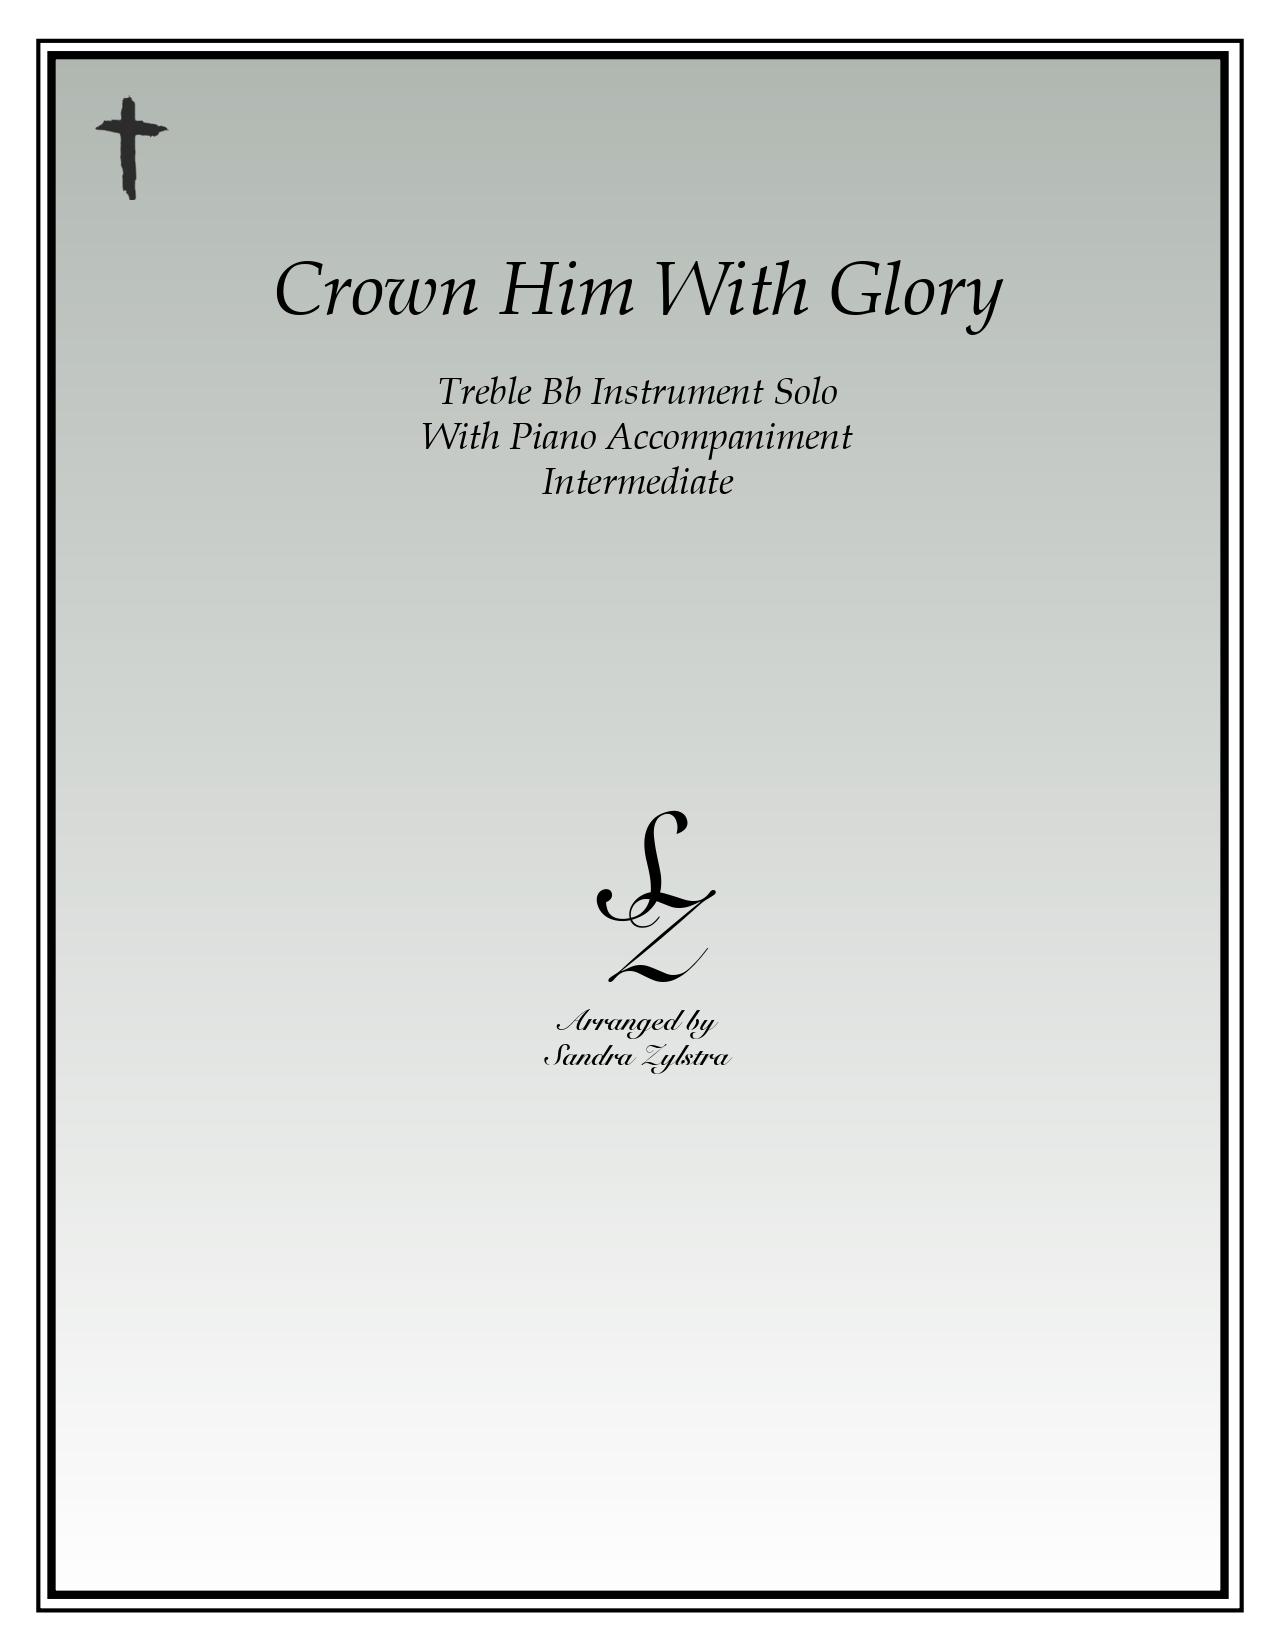 Crown Him With Glory Bb instrument solo part cover page 00011